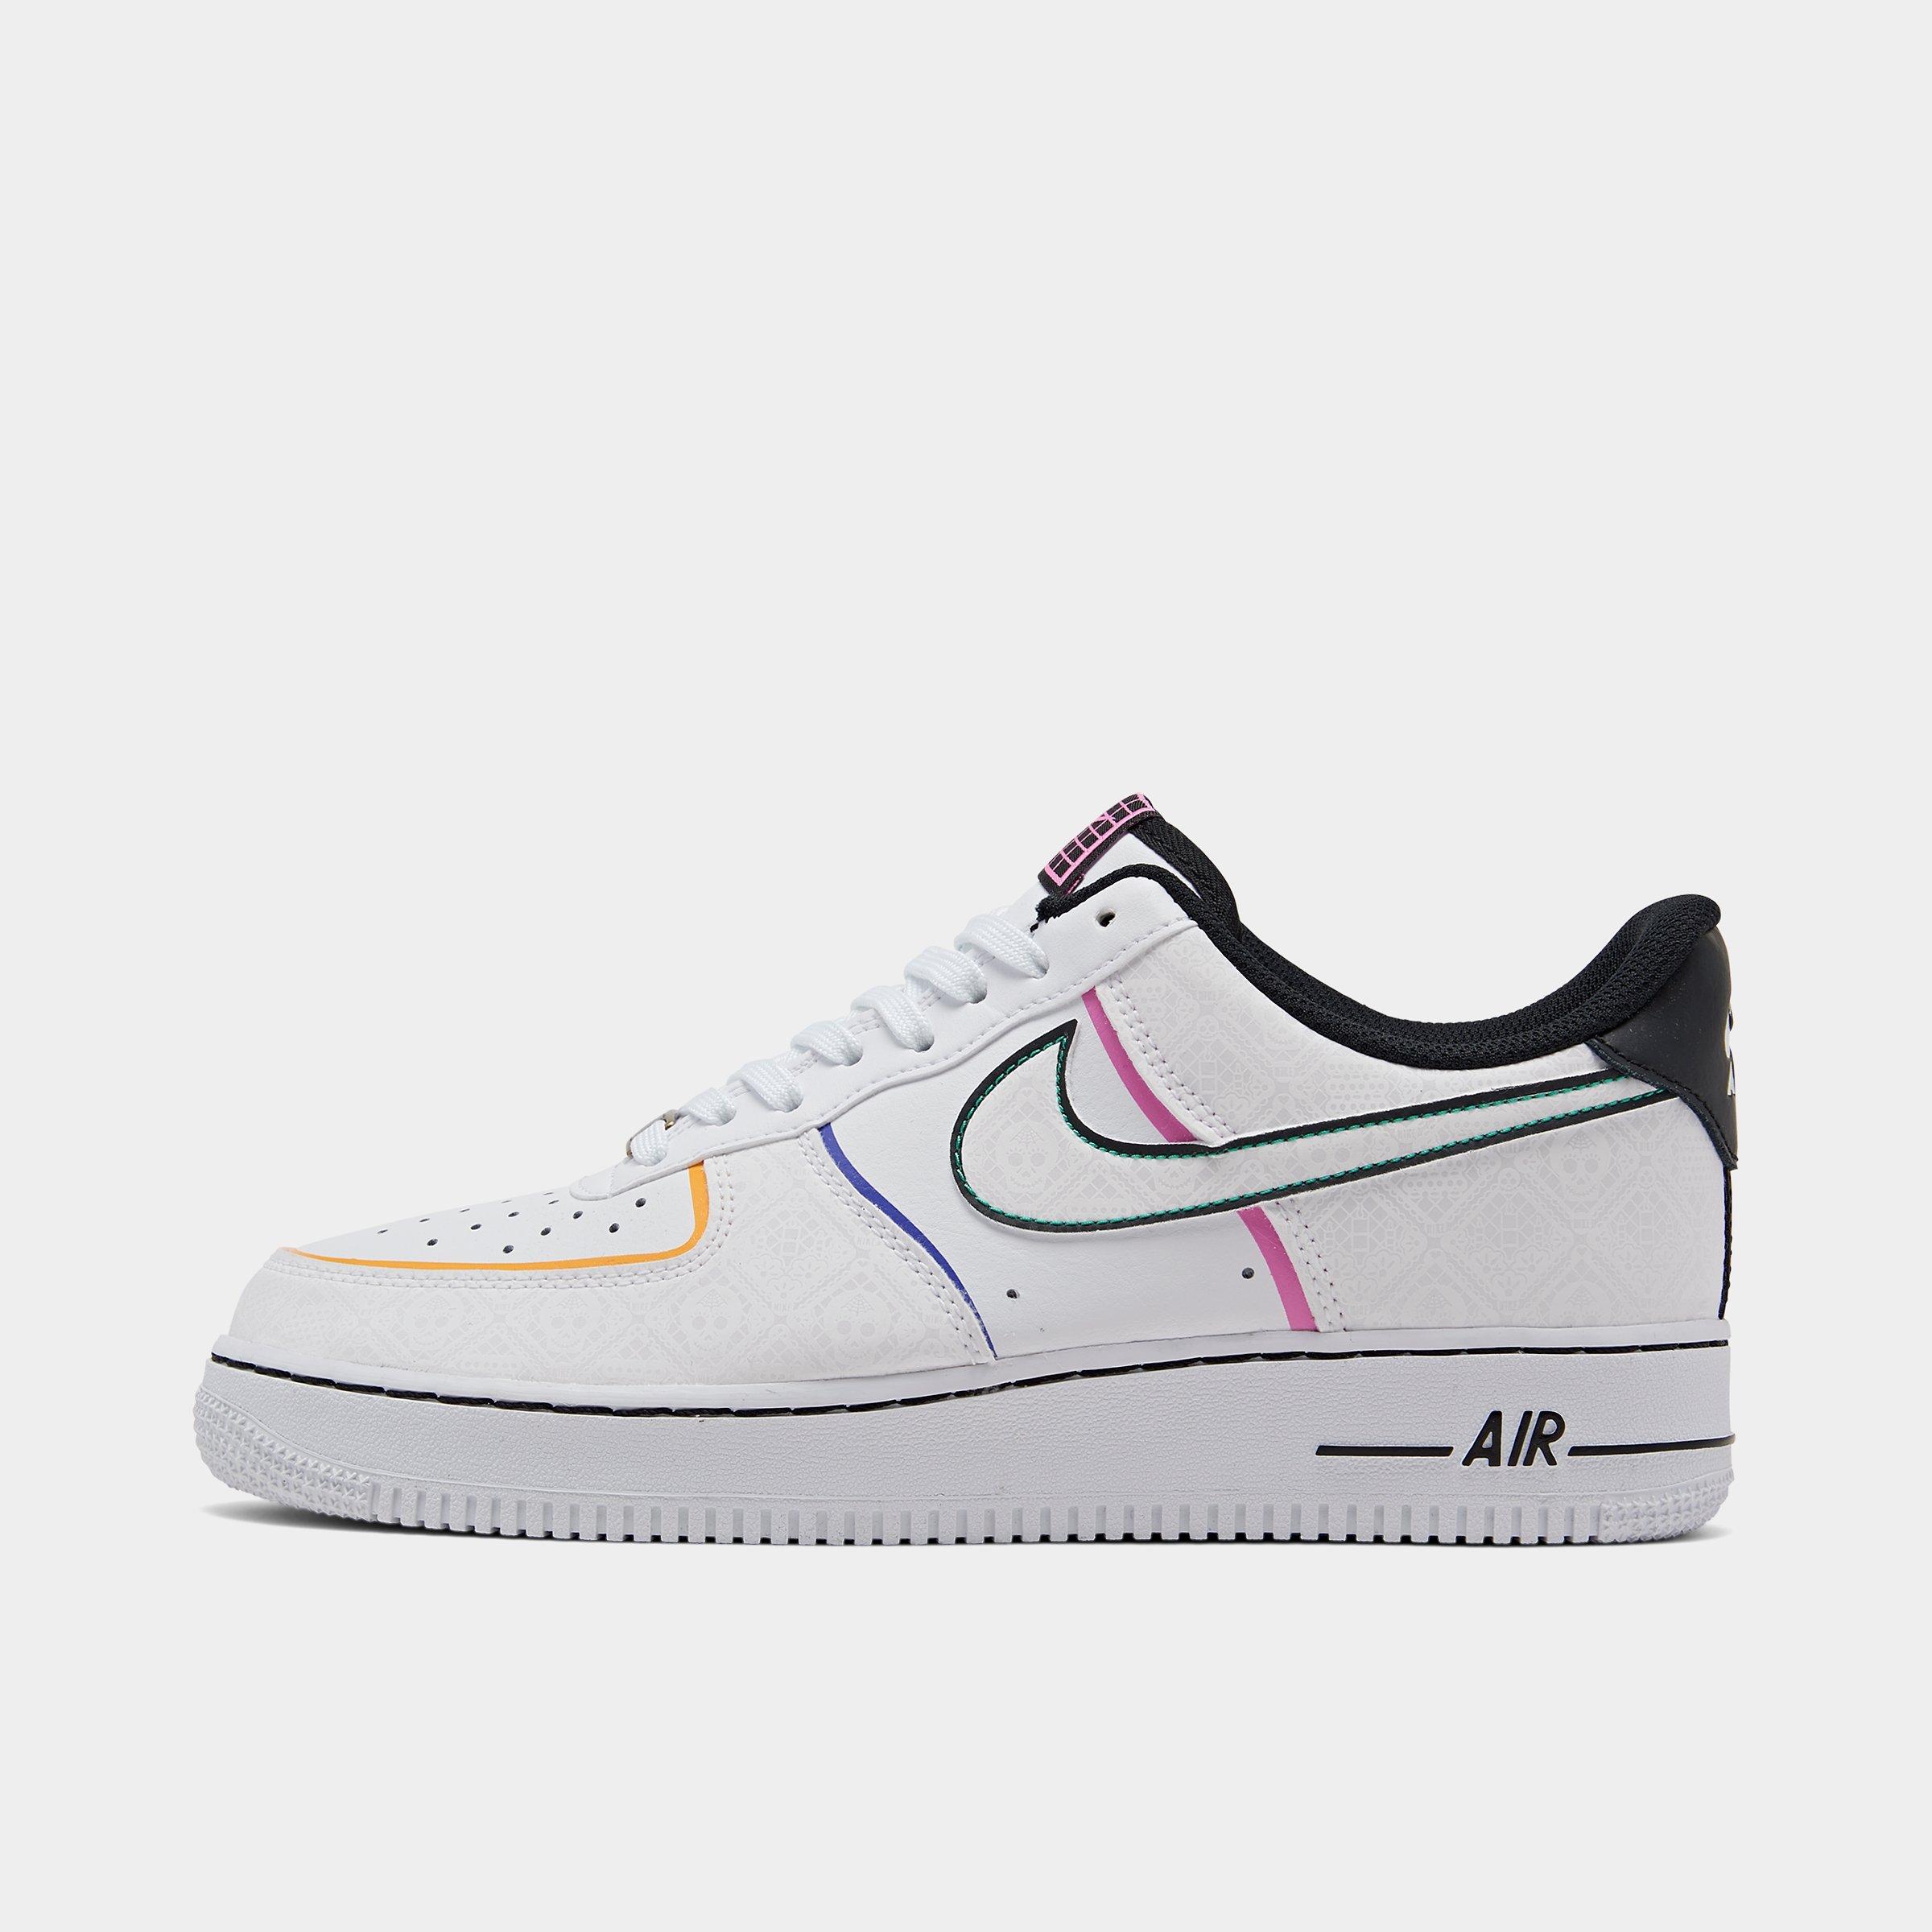 finish line air forces